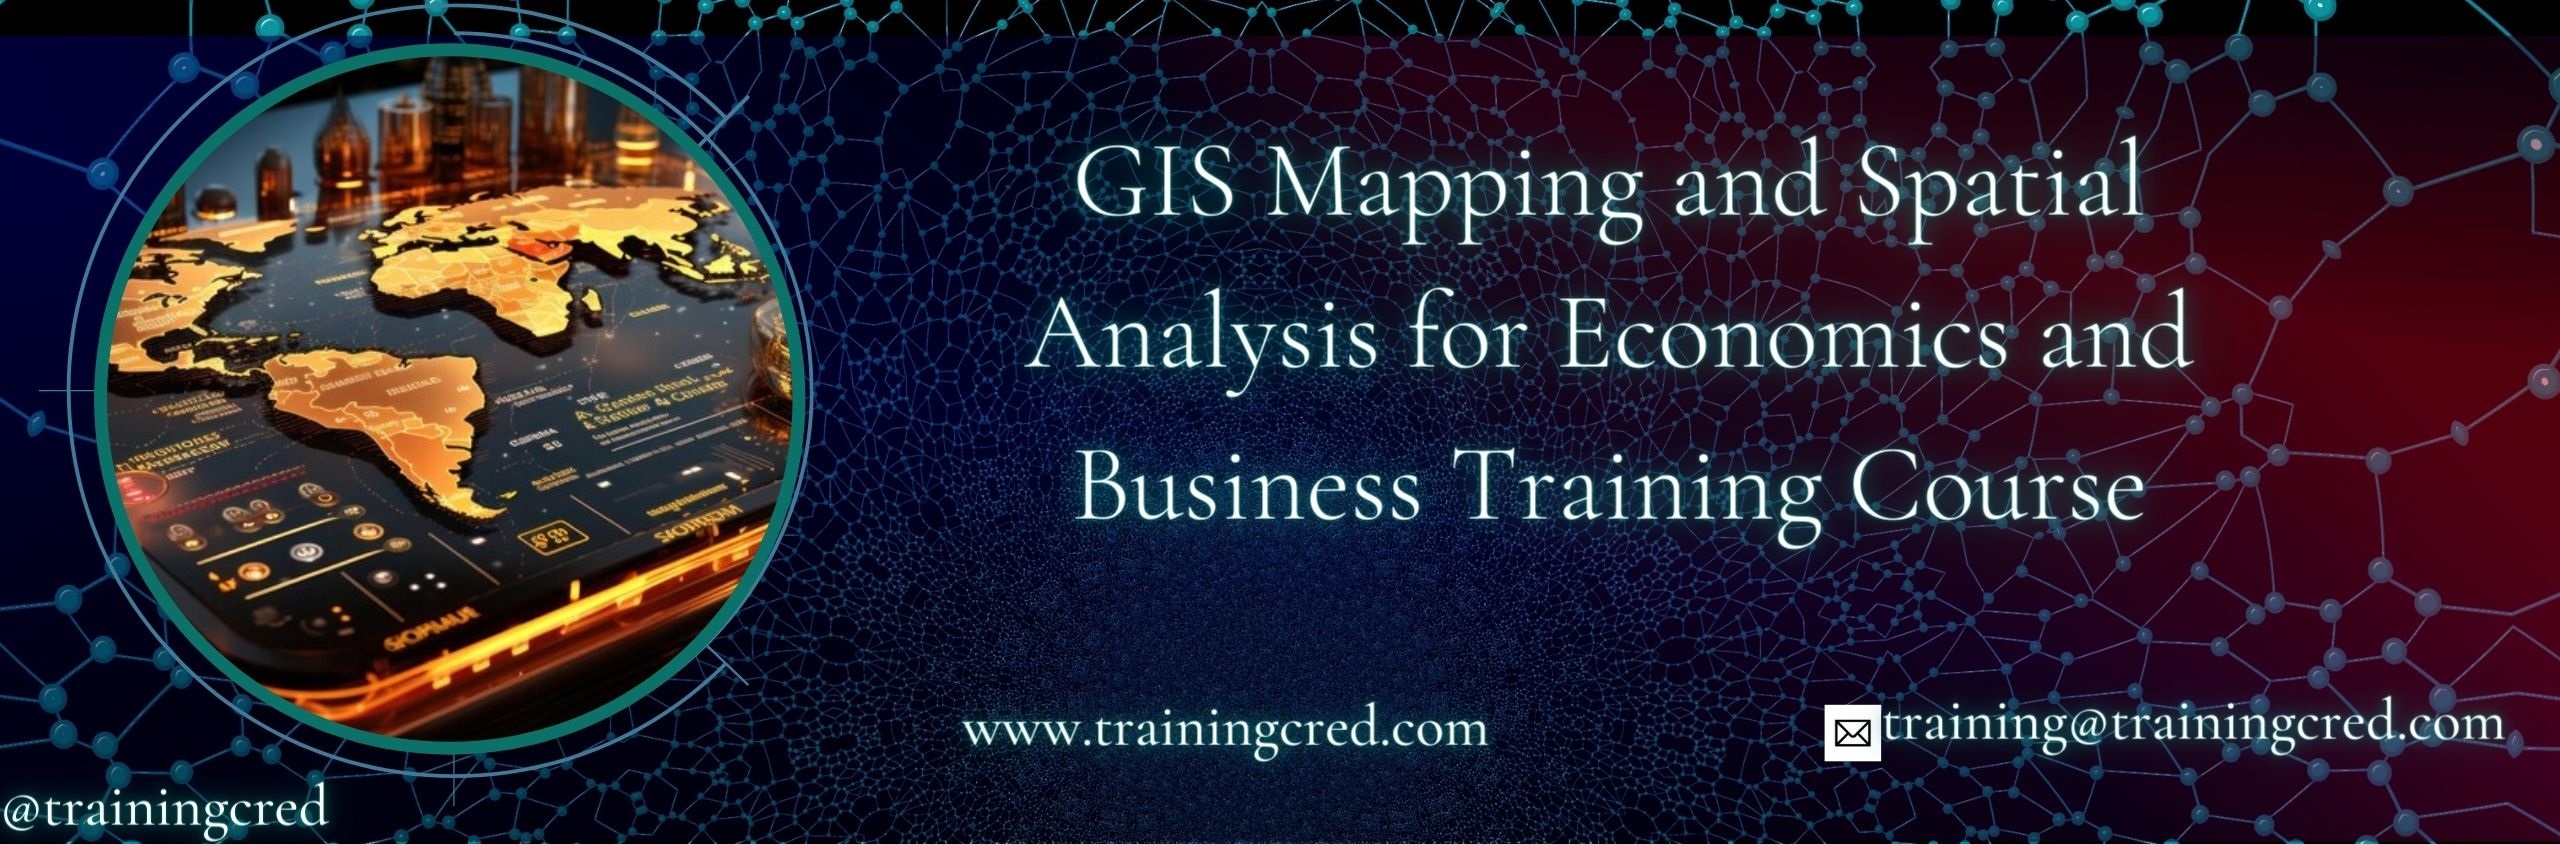 GIS Mapping and Spatial Analysis for Economics and Business Training